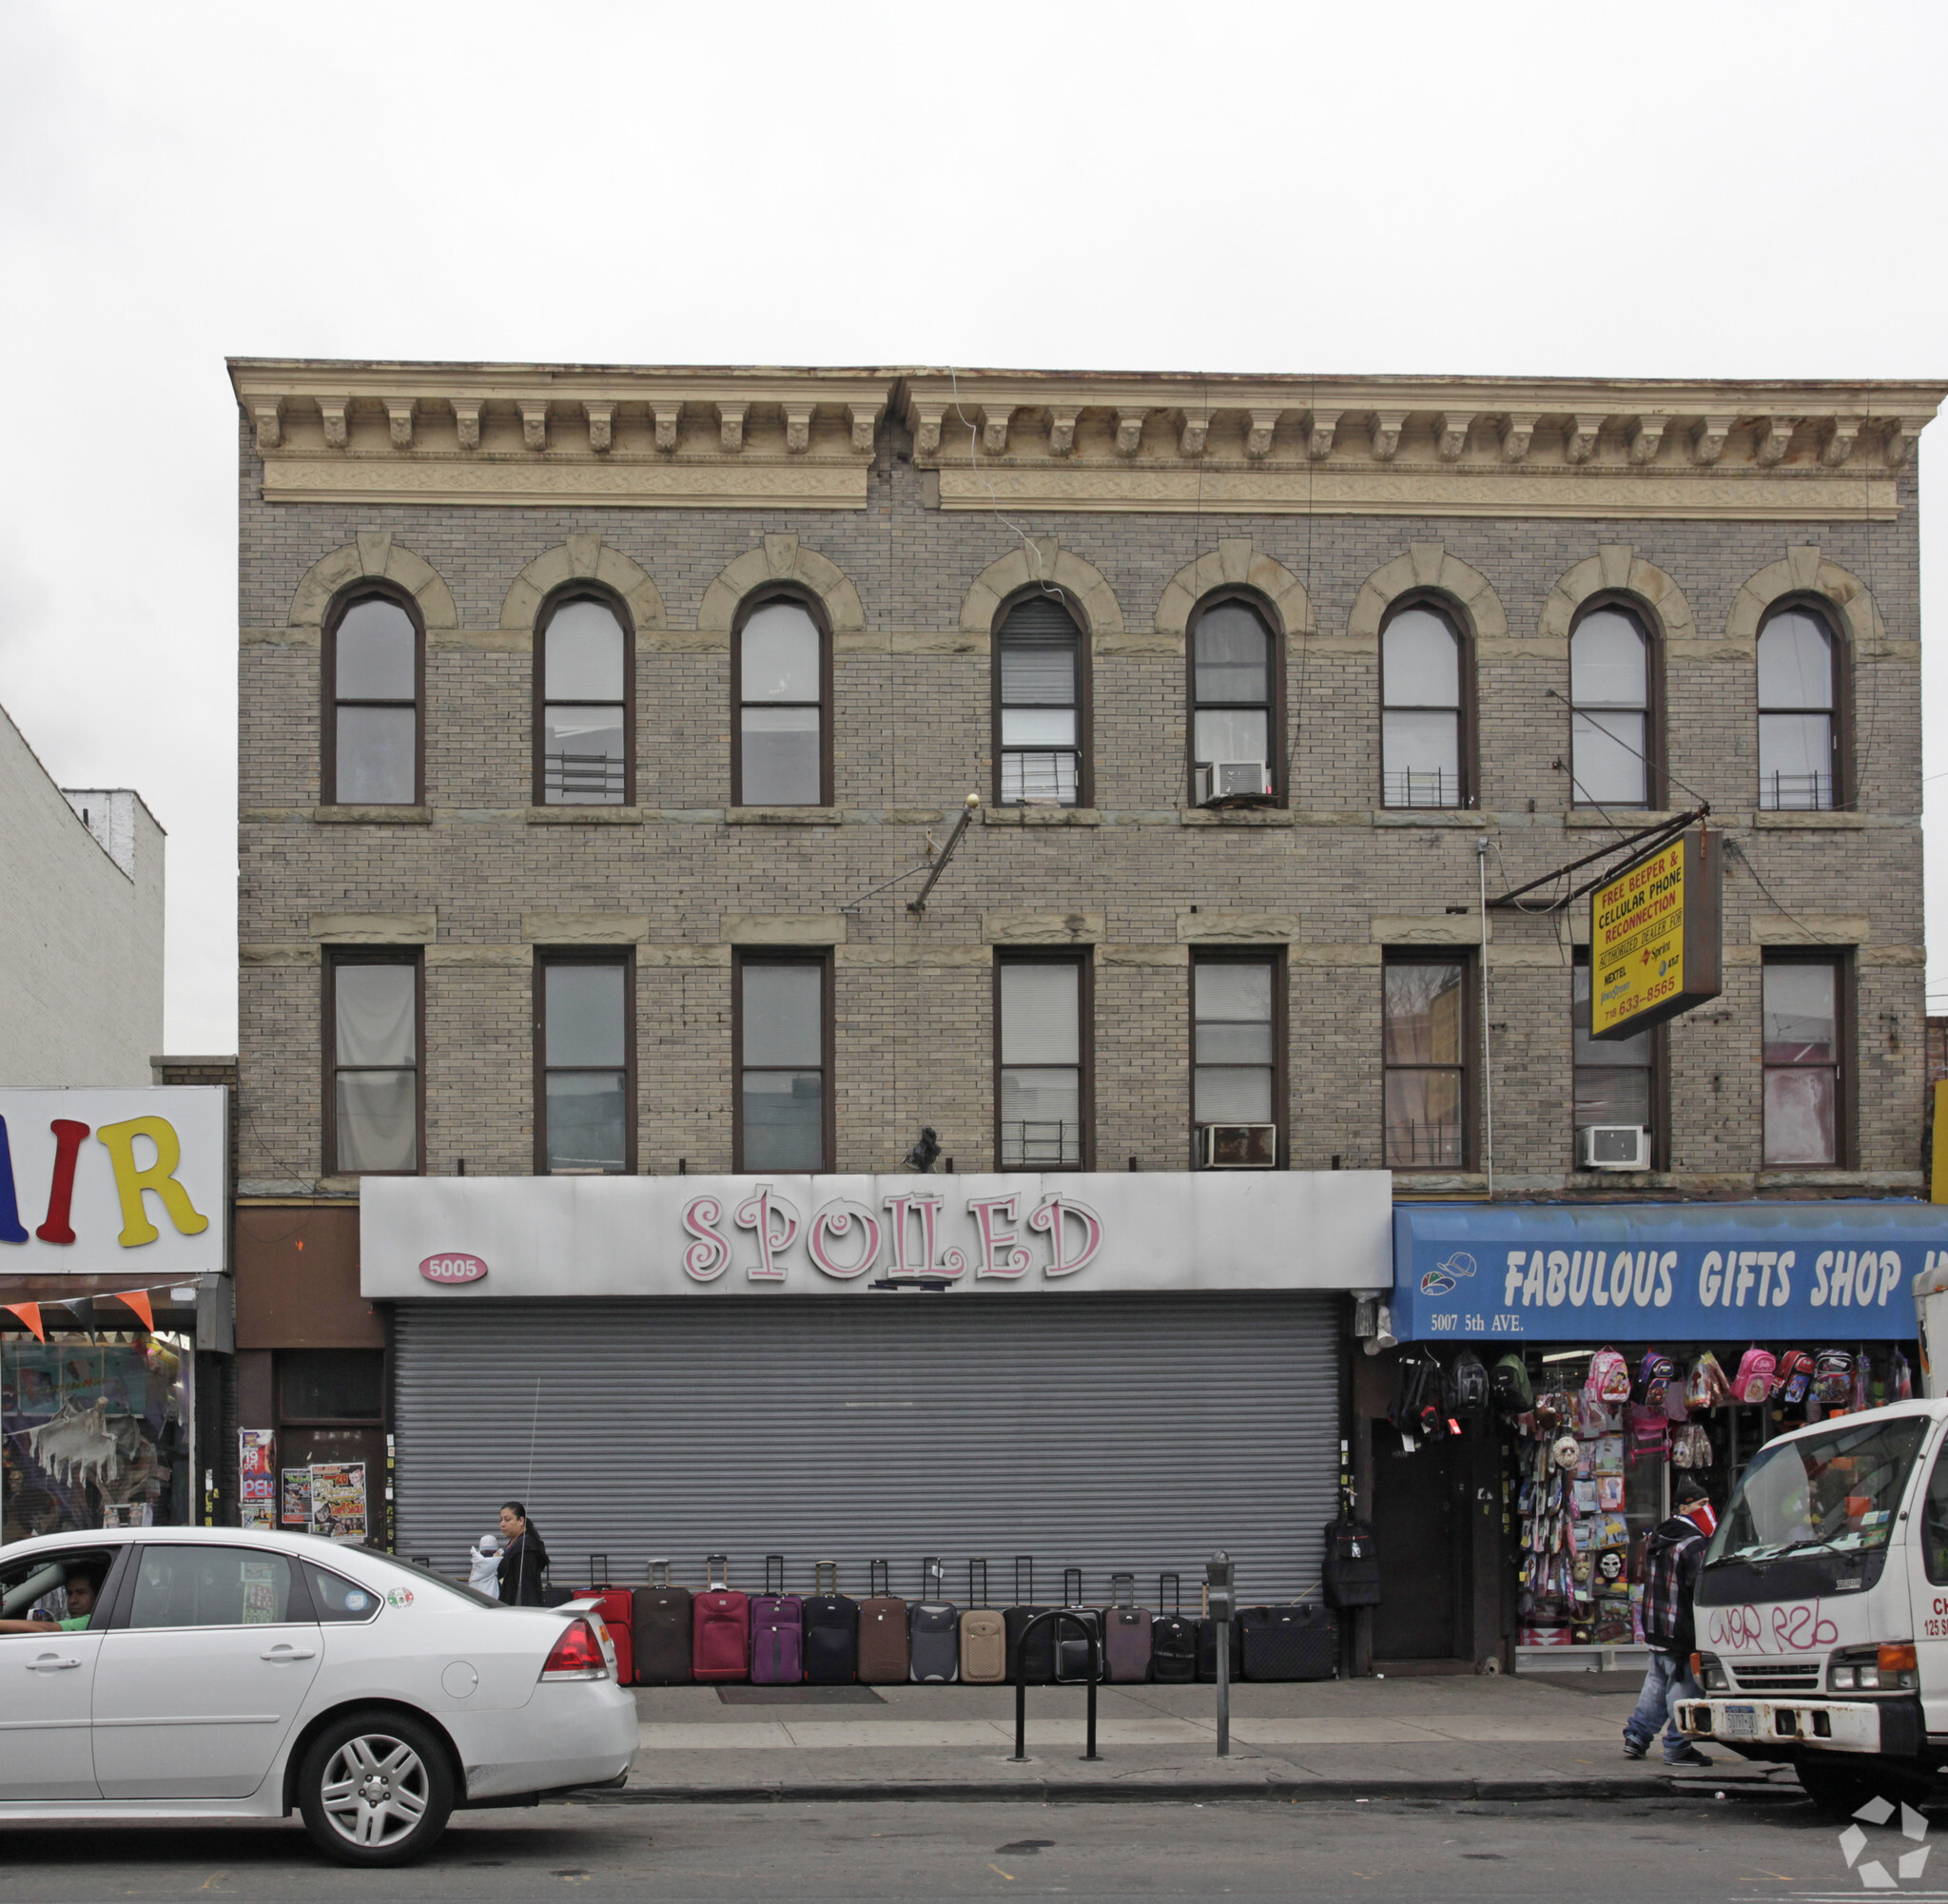 A street view featuring a three-story brick building with arched windows. The first floor has businesses, including a store called "SPOILED" with a closed shutter and sidewalk display of suitcases, and a shop named "FABULOUS GIFTS SHOP" with various items outside.